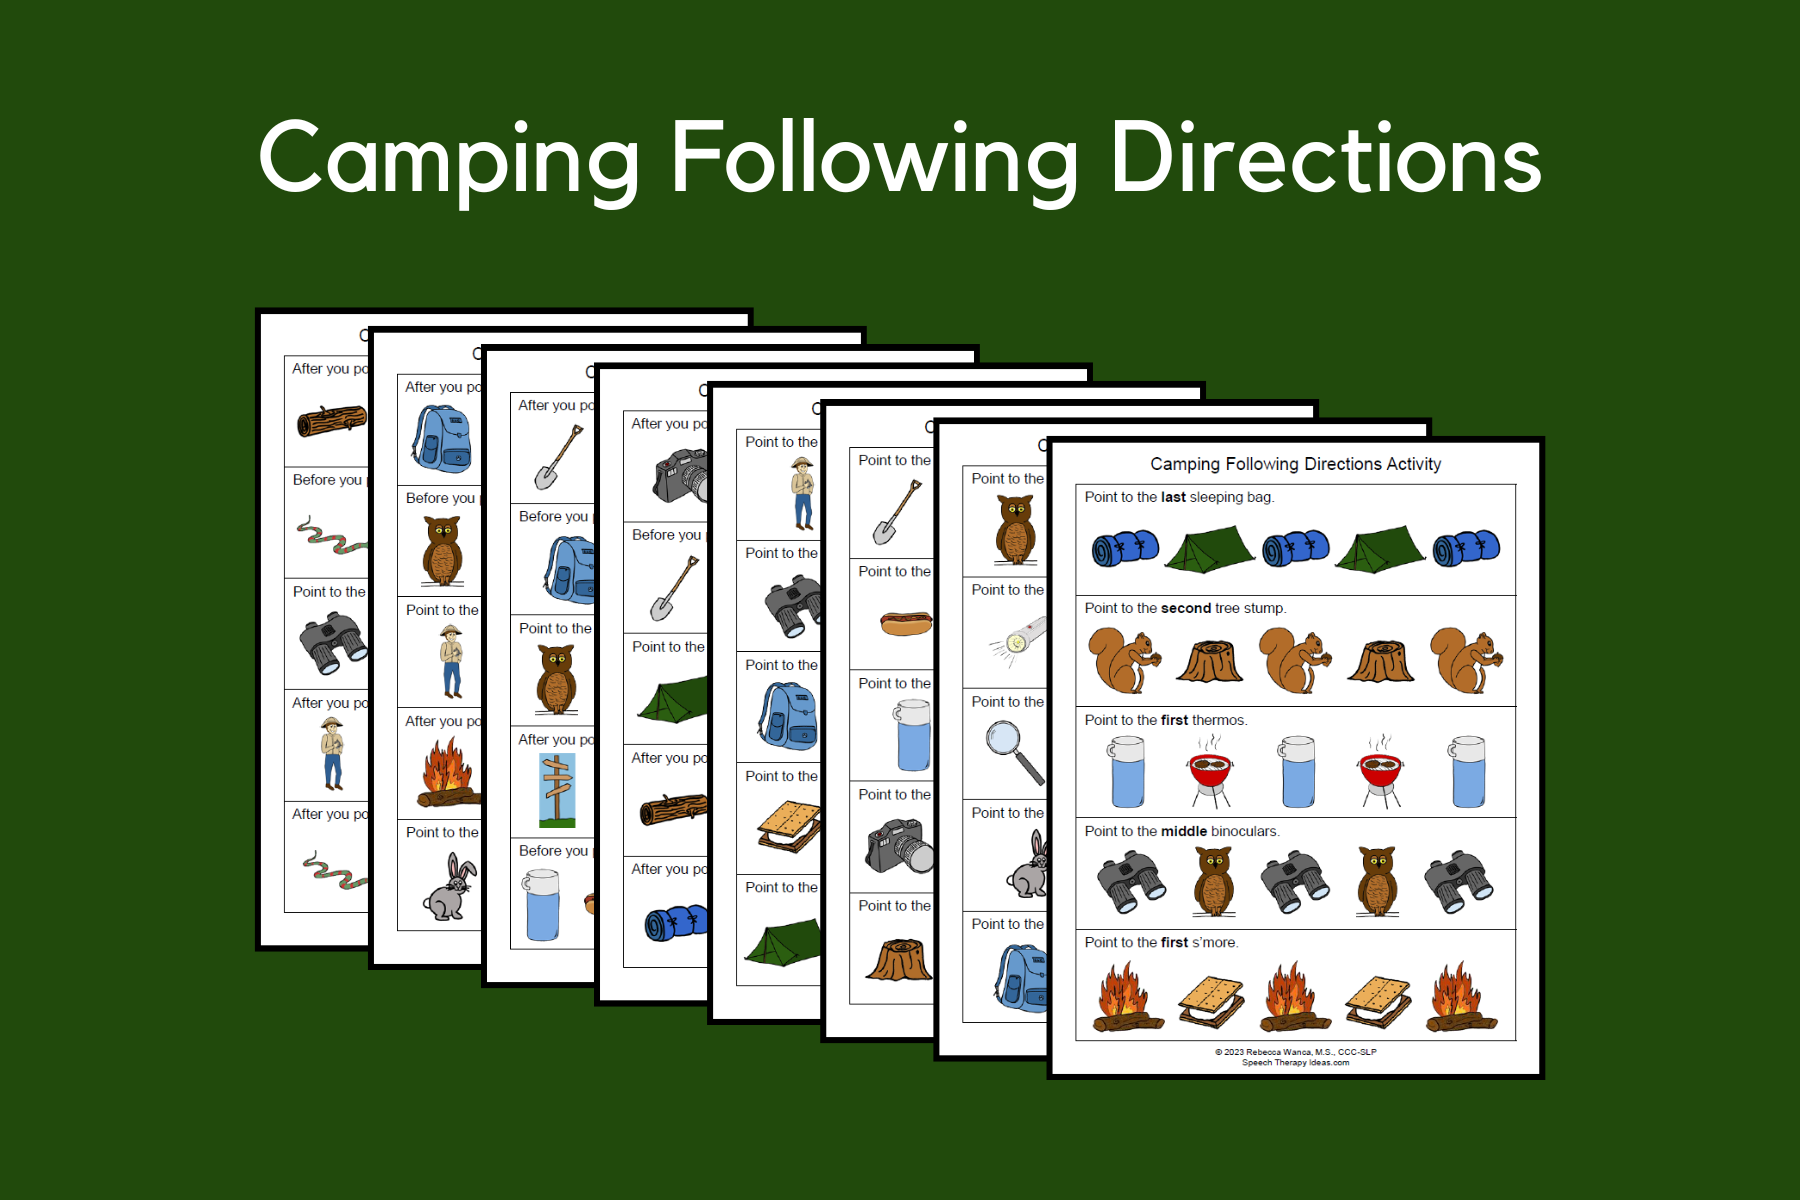 Camping Following Directions Activity